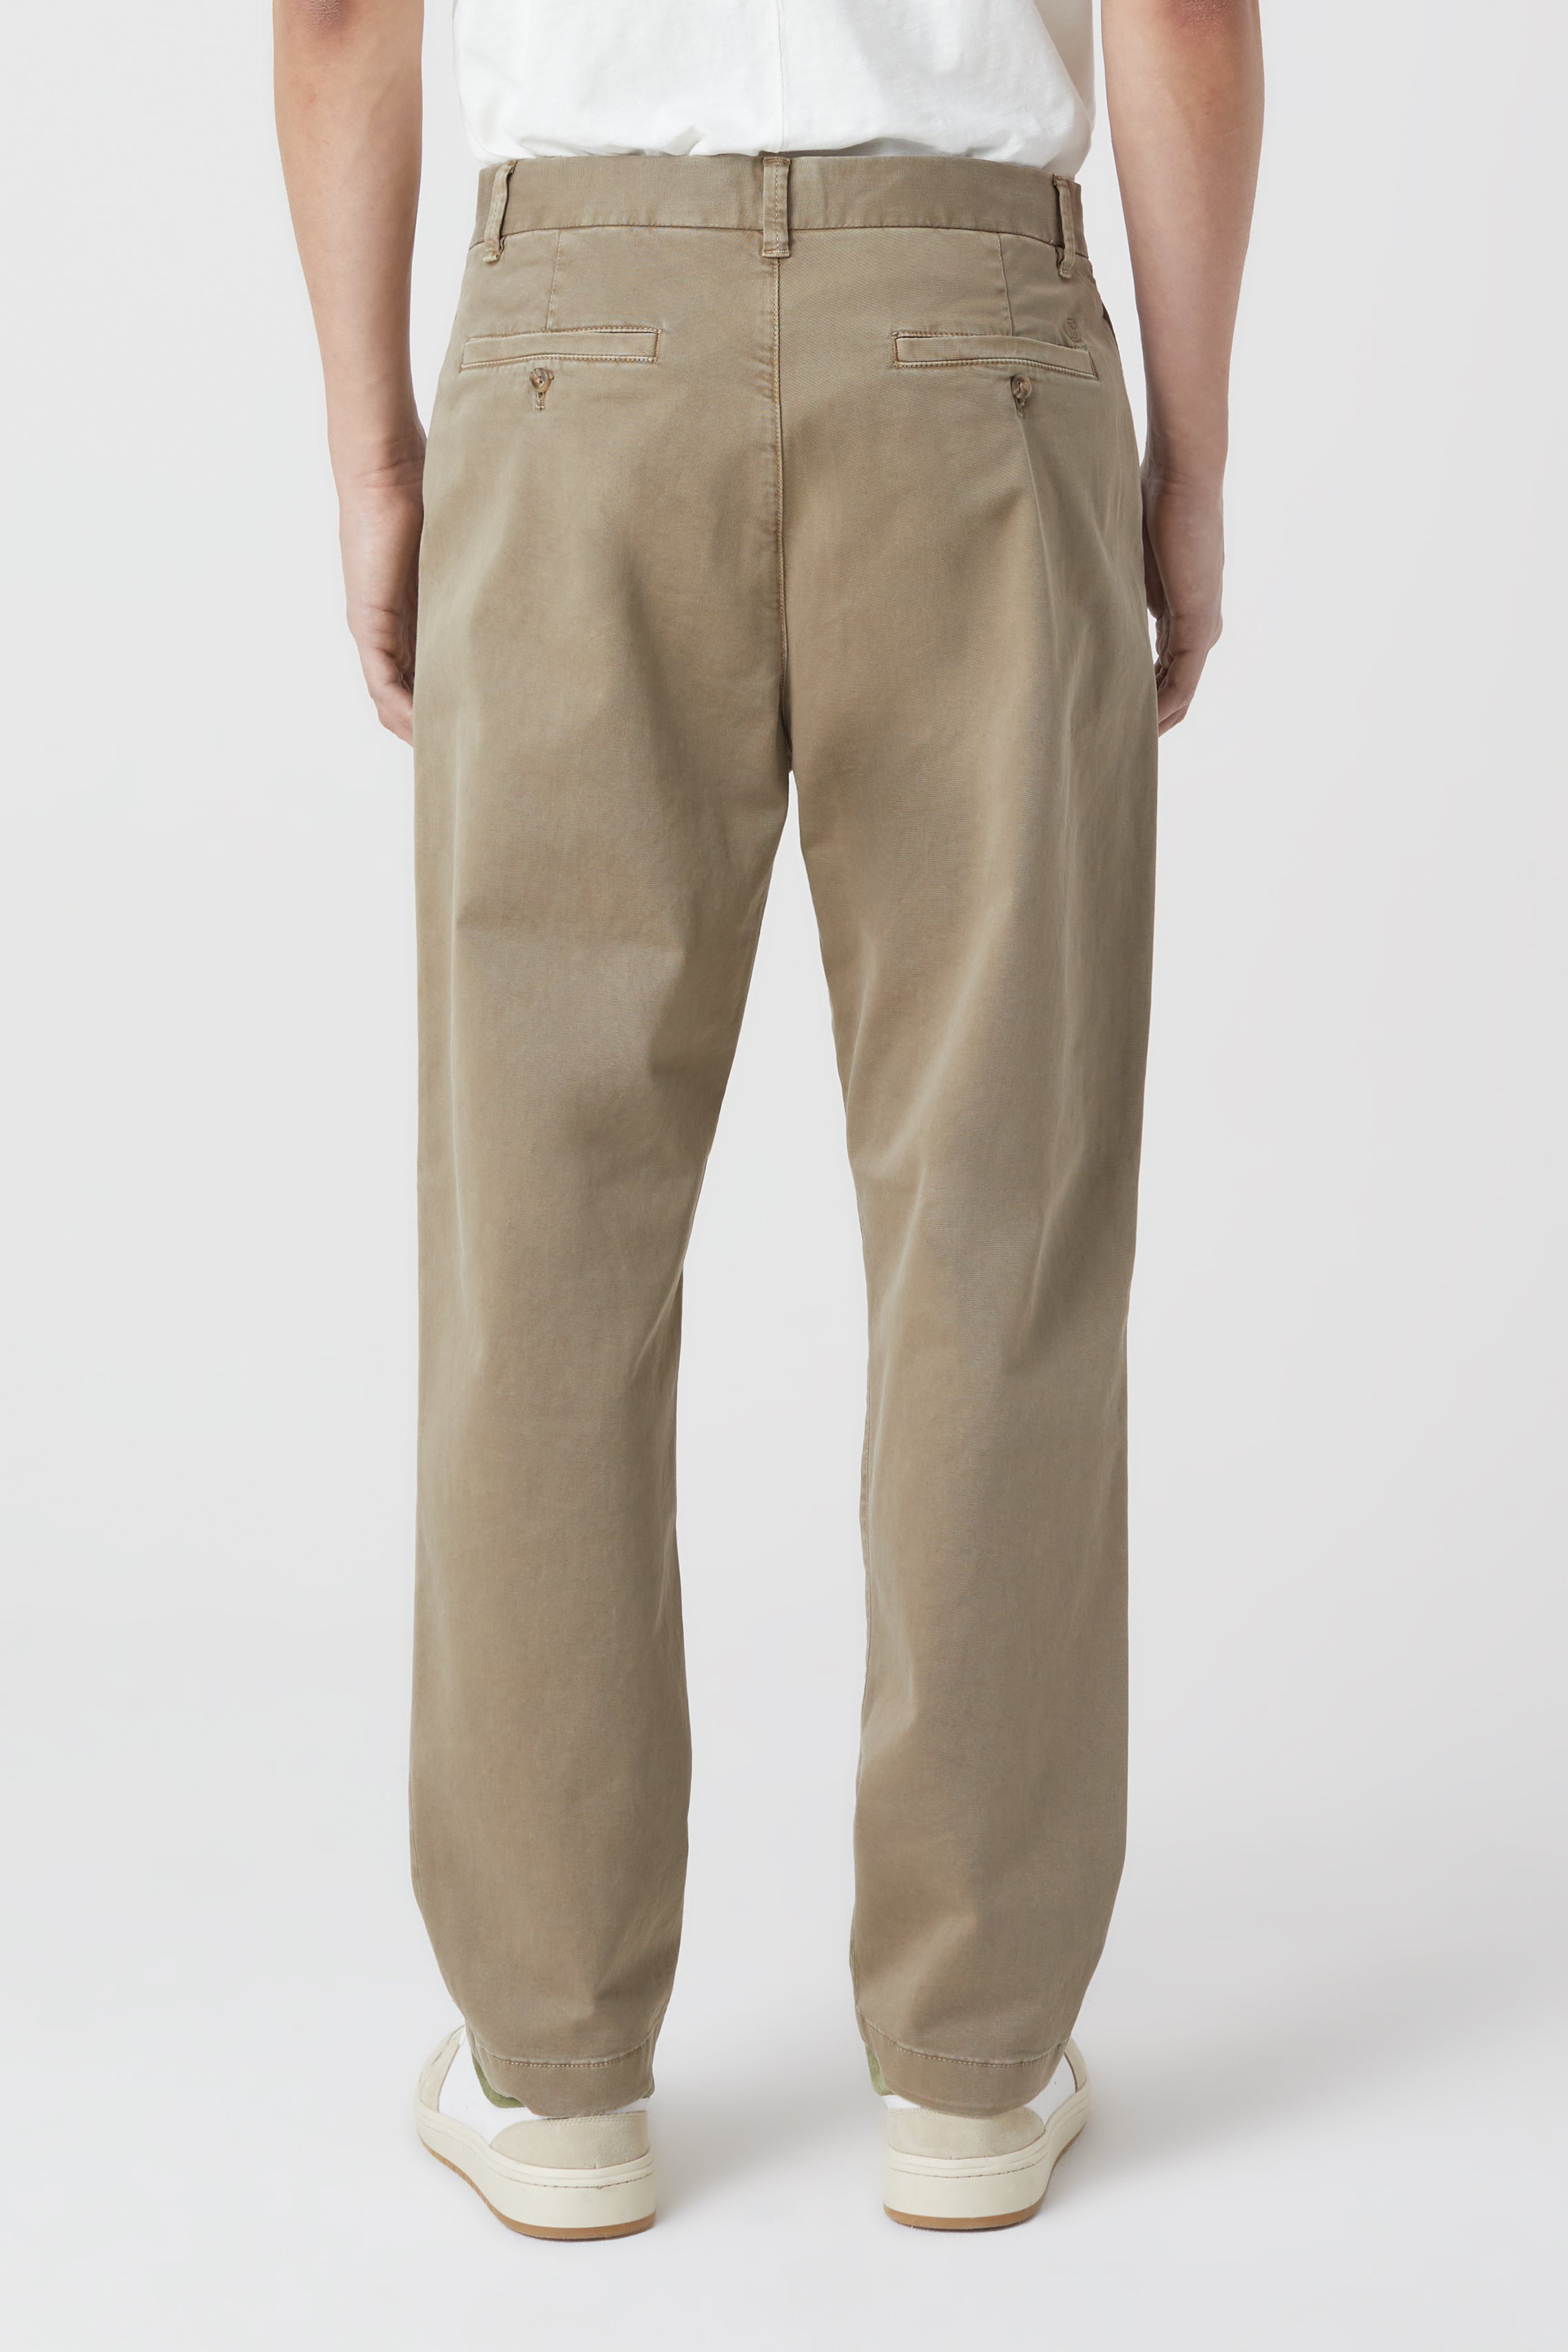 CLOSED-OUTLET-SALE-STYLE-NAME-TACOMA-TAPERED-PANTS-Hosen-ARCHIVE-COLLECTION-4_baf94471-0d10-48b5-b61d-0224f5dc743a.jpg